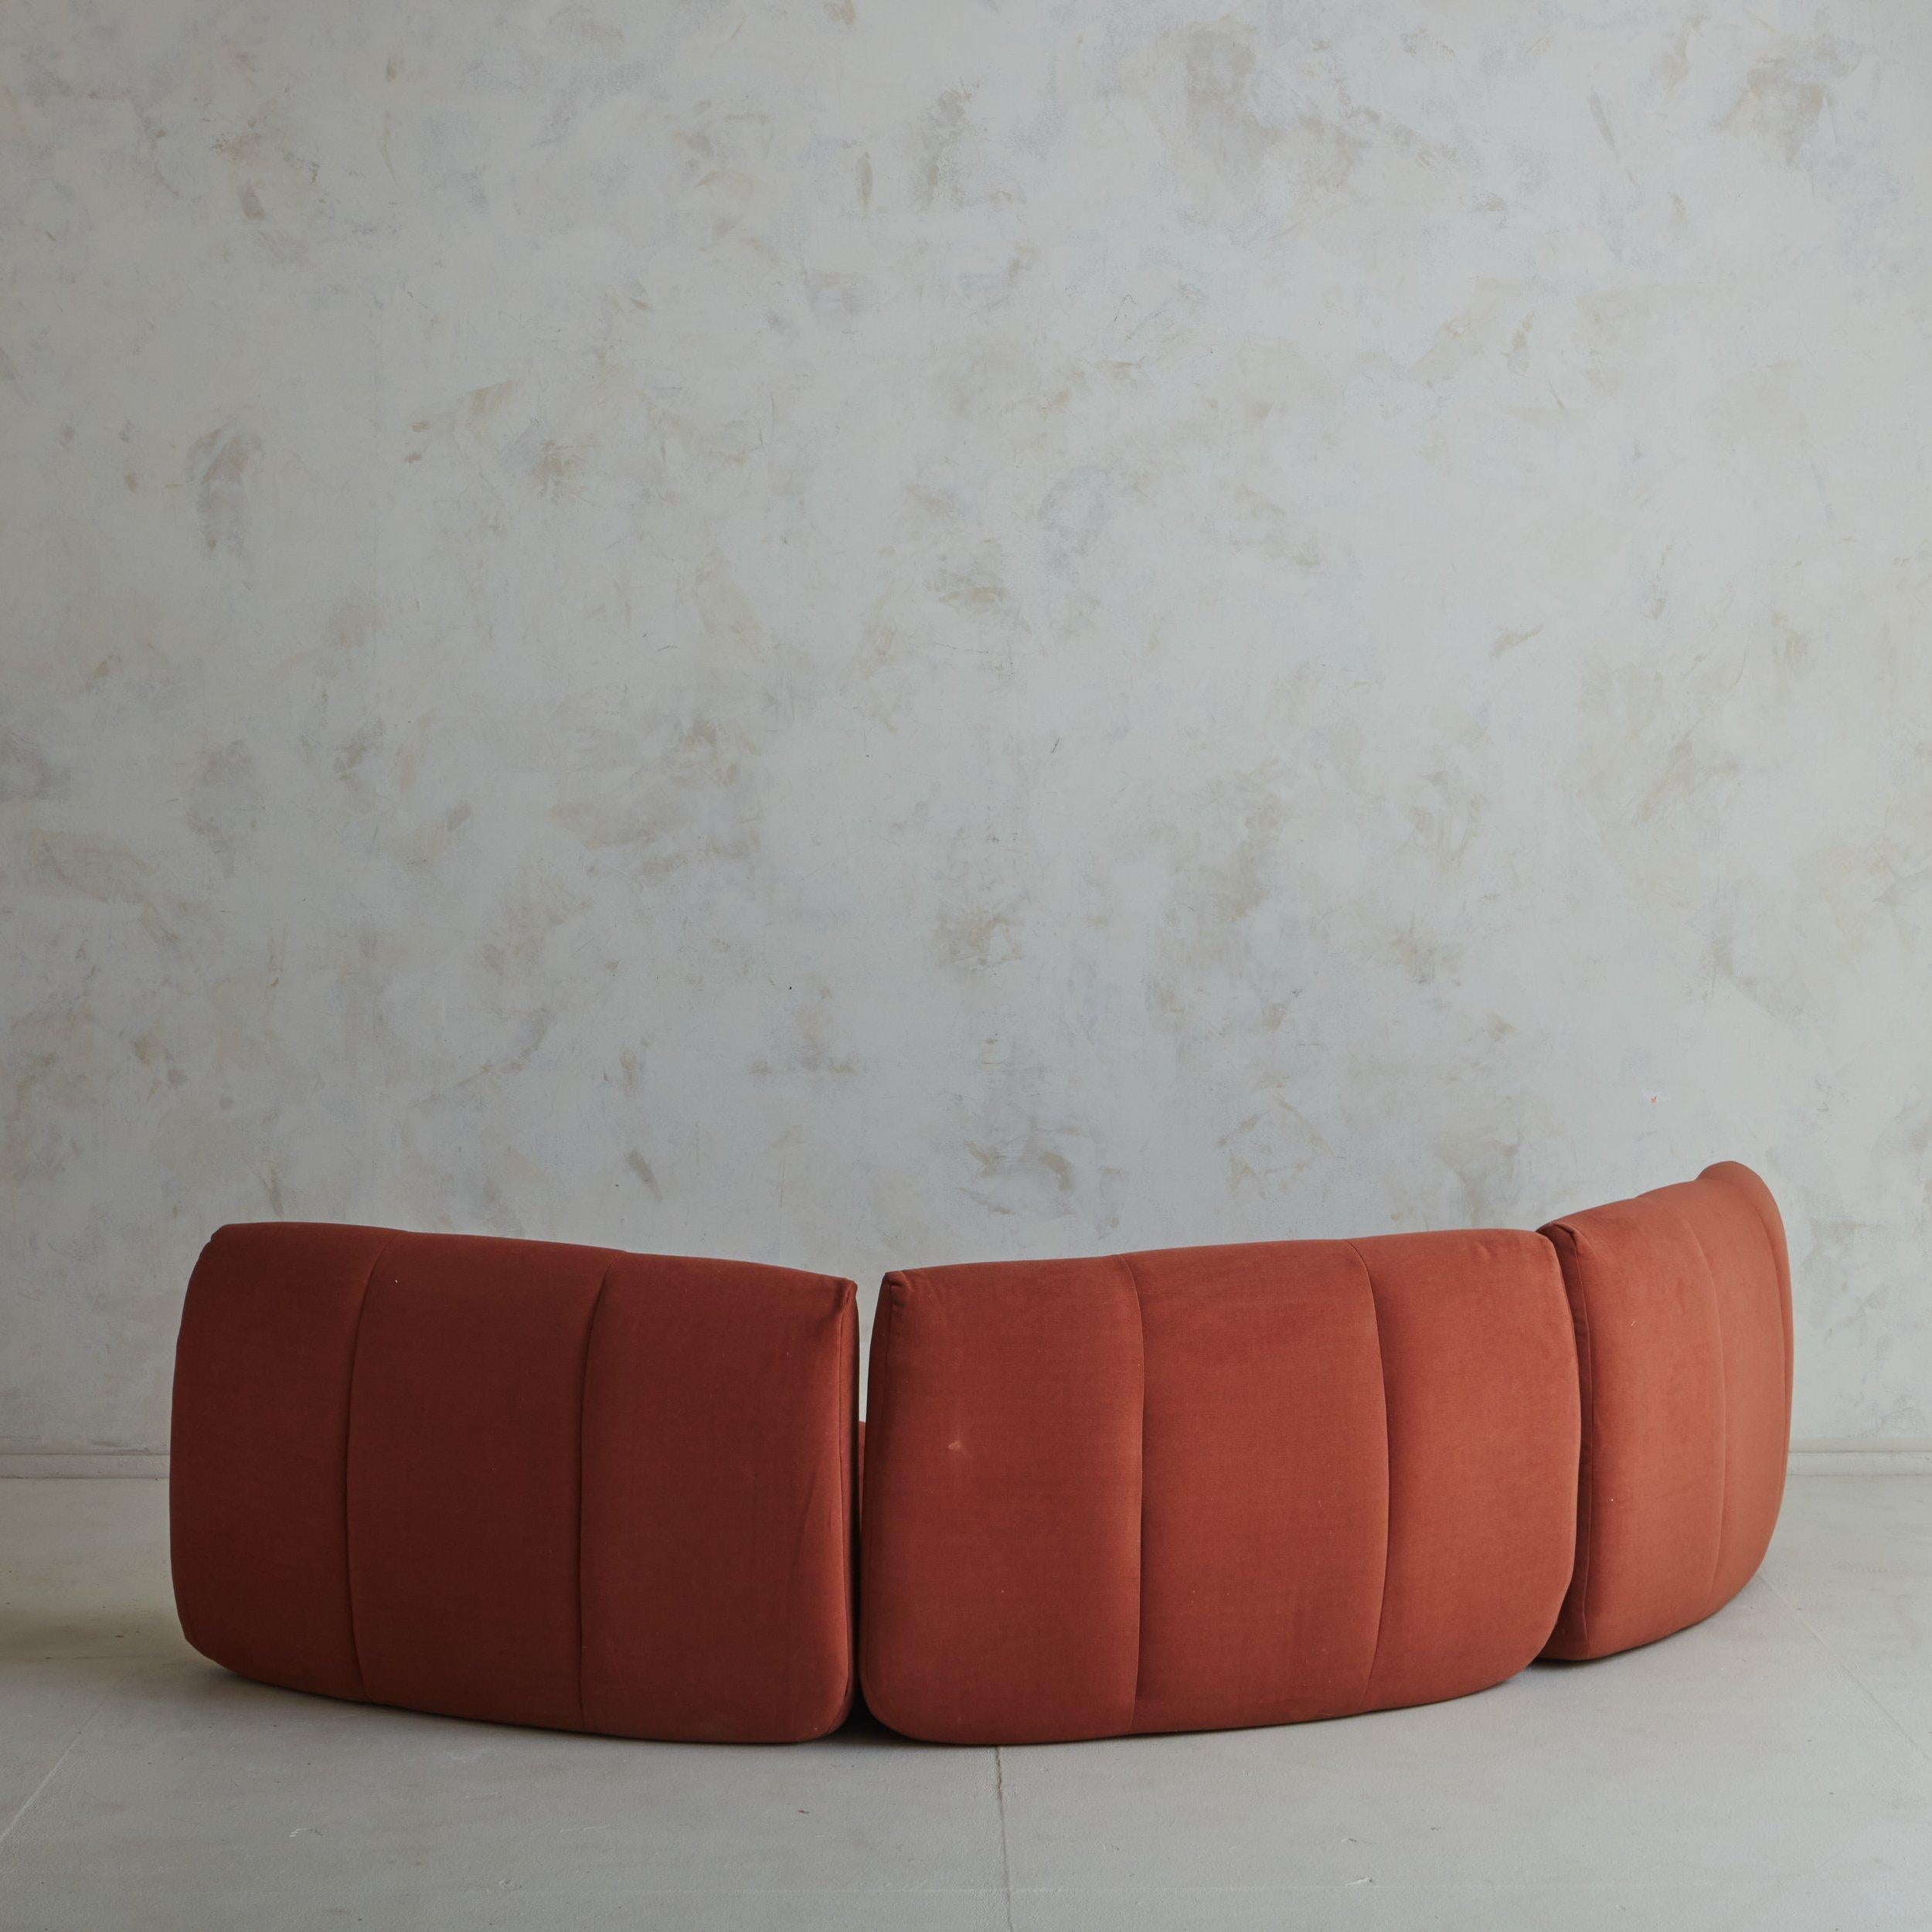 Upholstery 3-Piece 'Gilda' Sofa with Ottoman by Michel Ducaroy for Ligne Roset, France 1972 For Sale